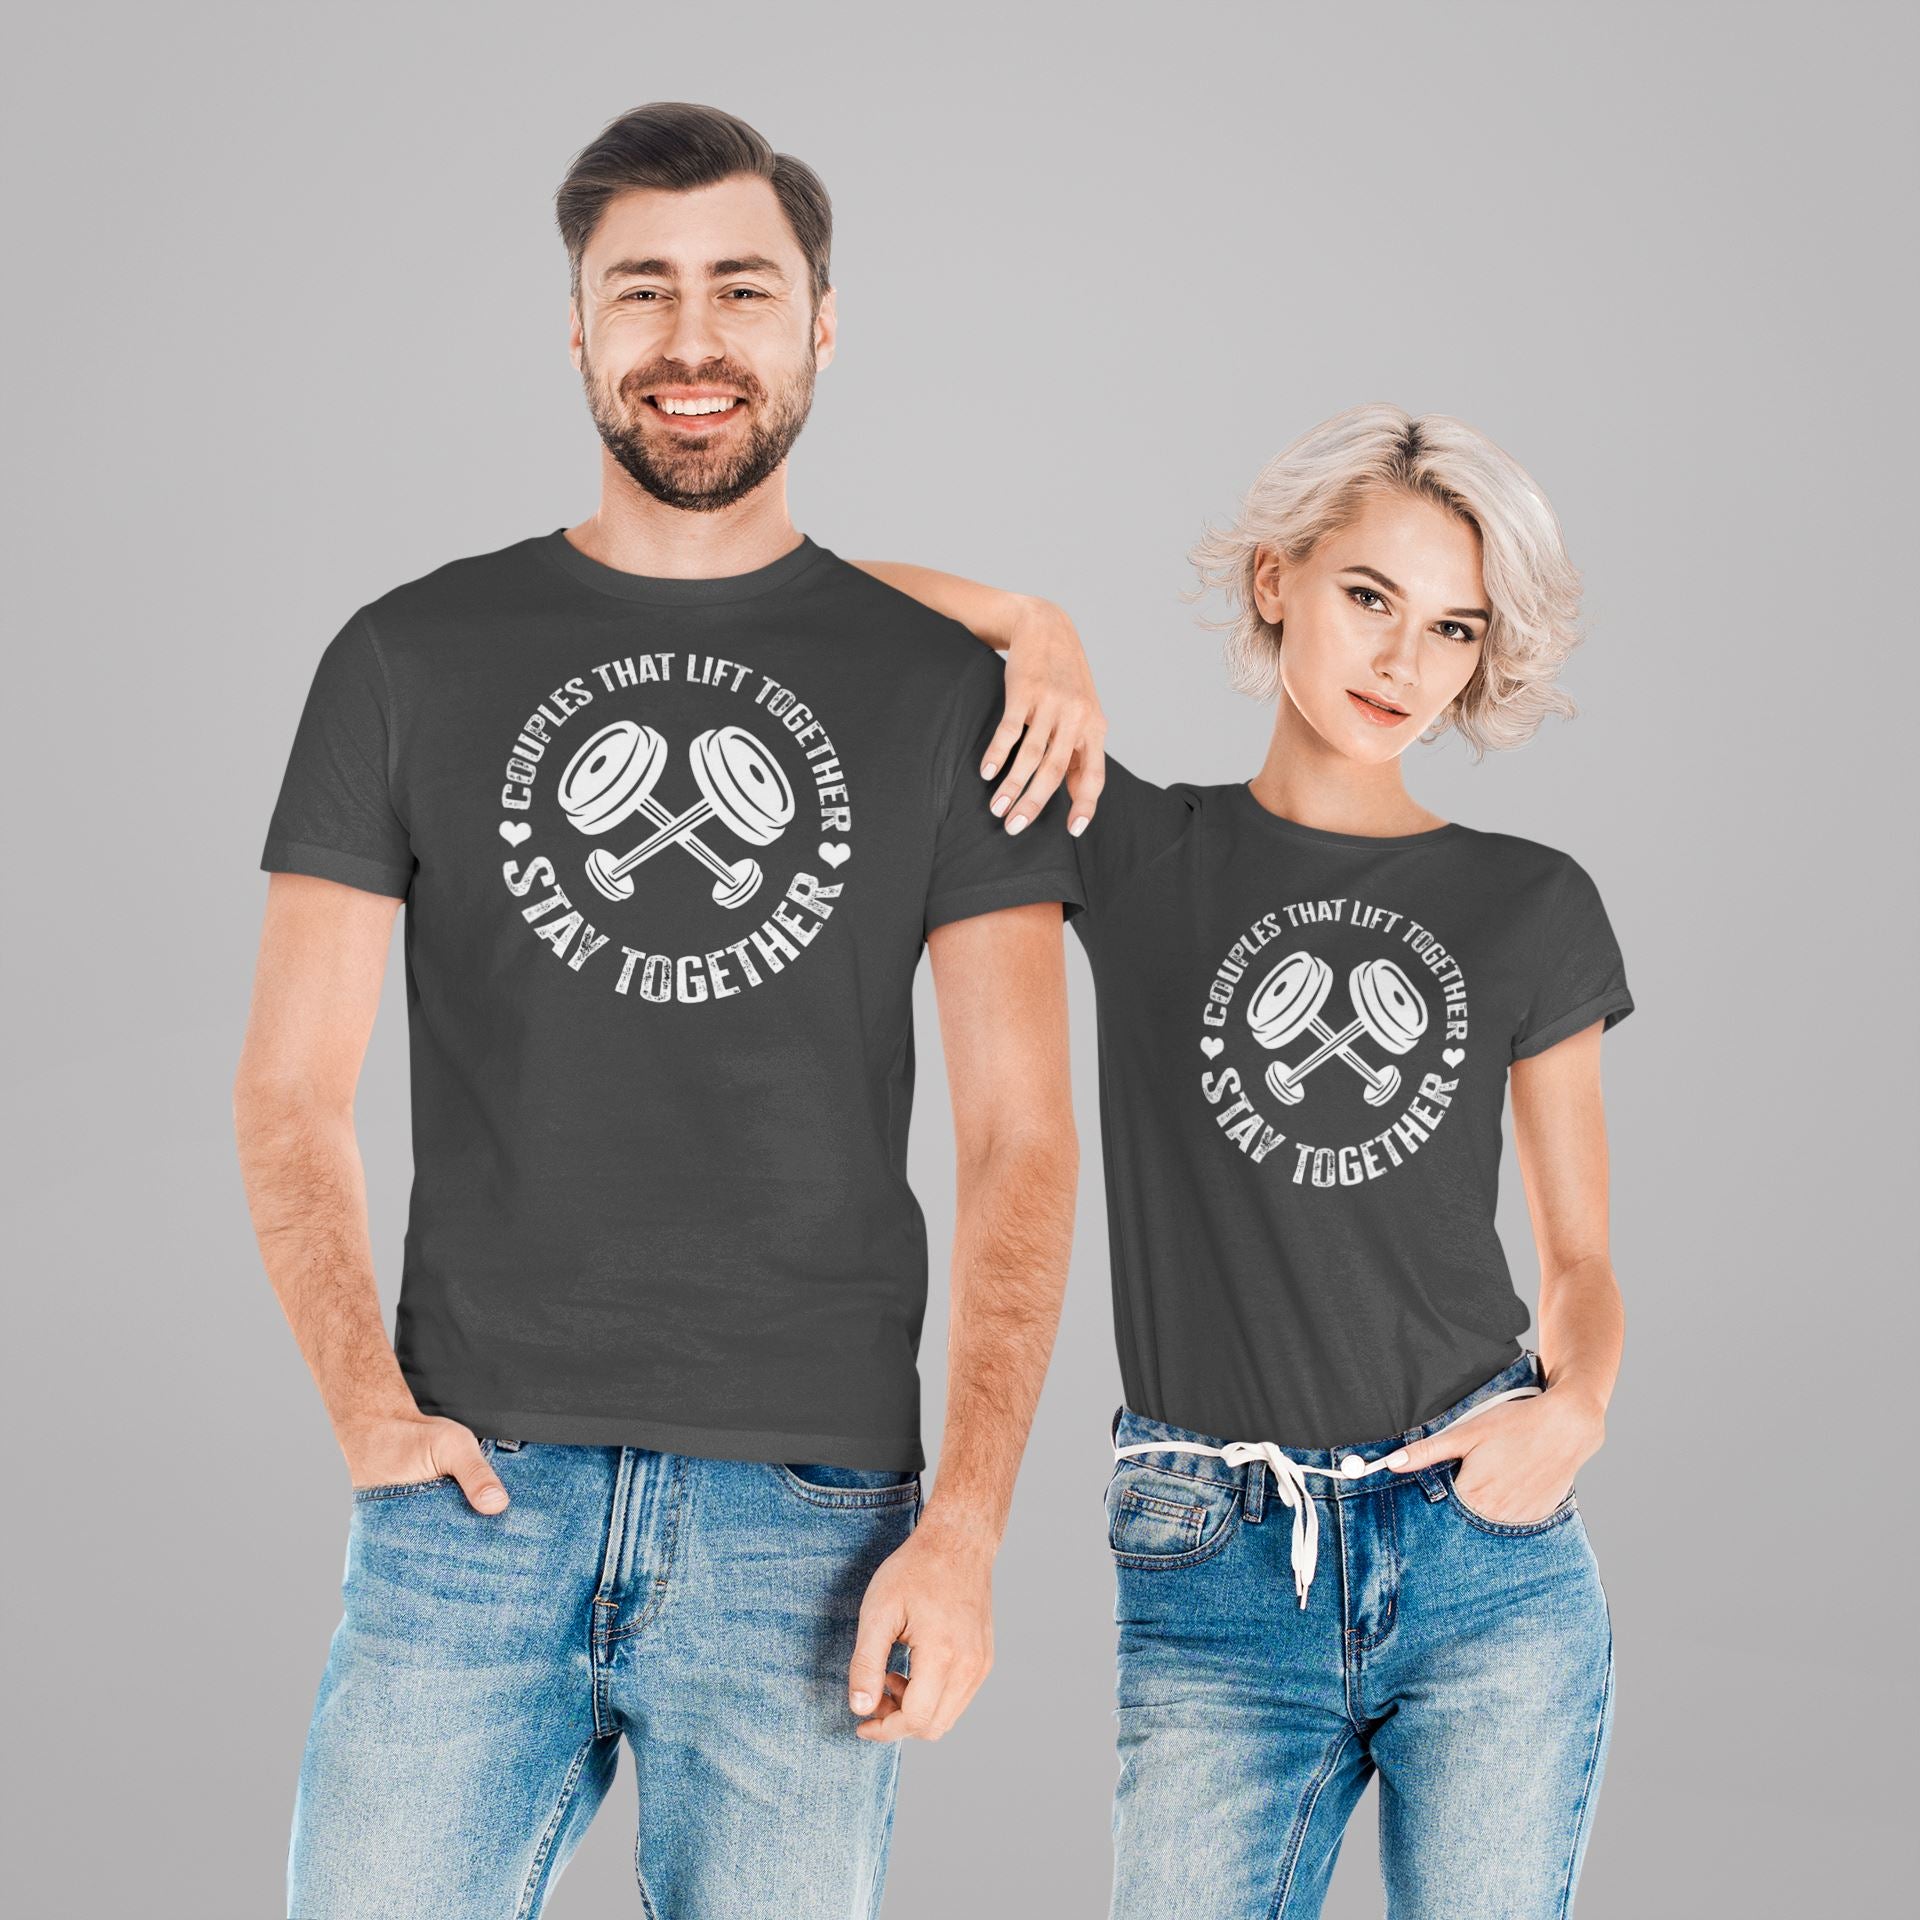 The Couple that Lifts Together Stays Together Special Matching Couple T Shirt for Men and Women freeshipping - Catch My Drift India